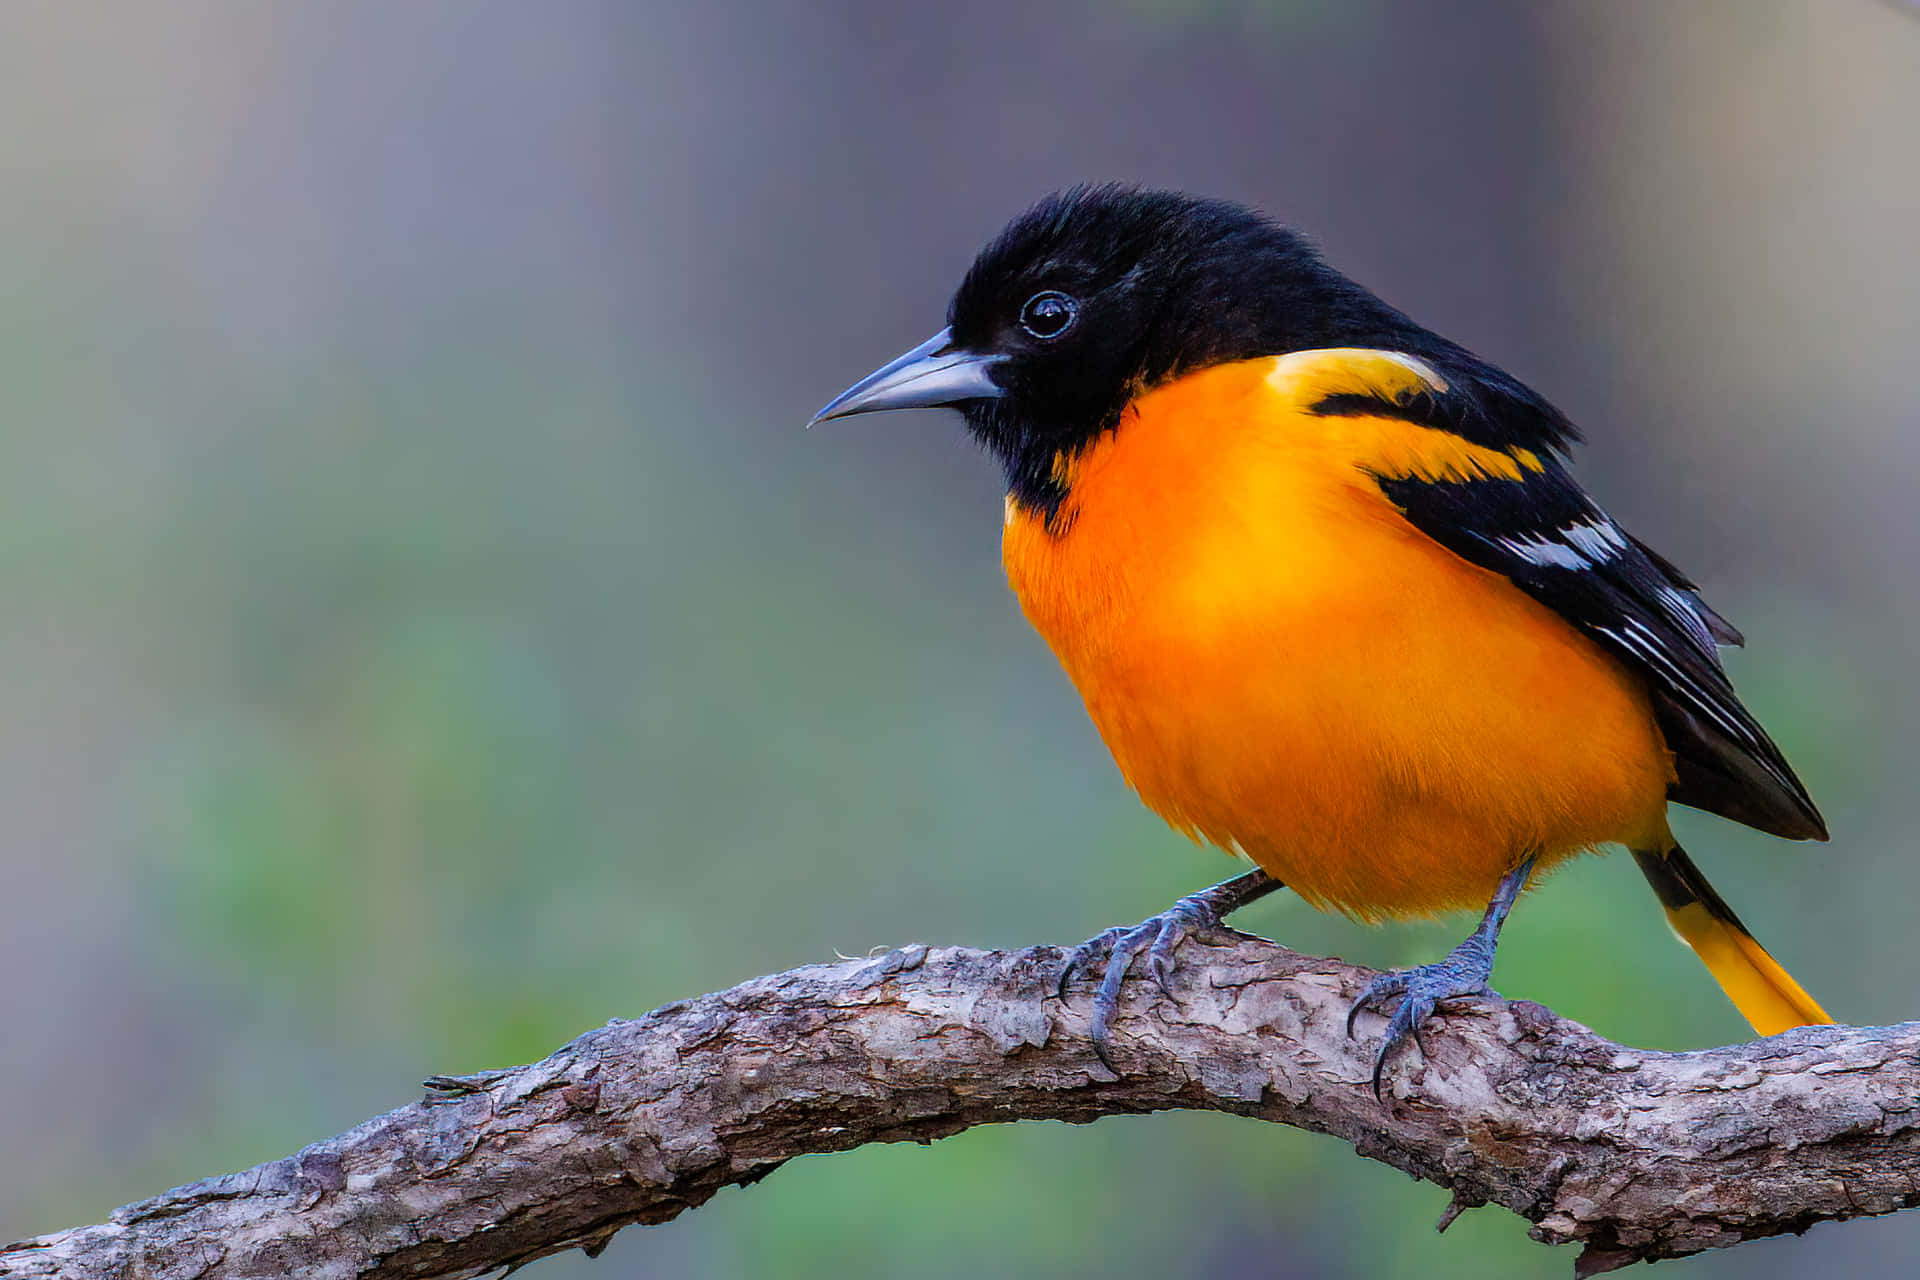 A Black And Orange Bird Is Sitting On A Branch